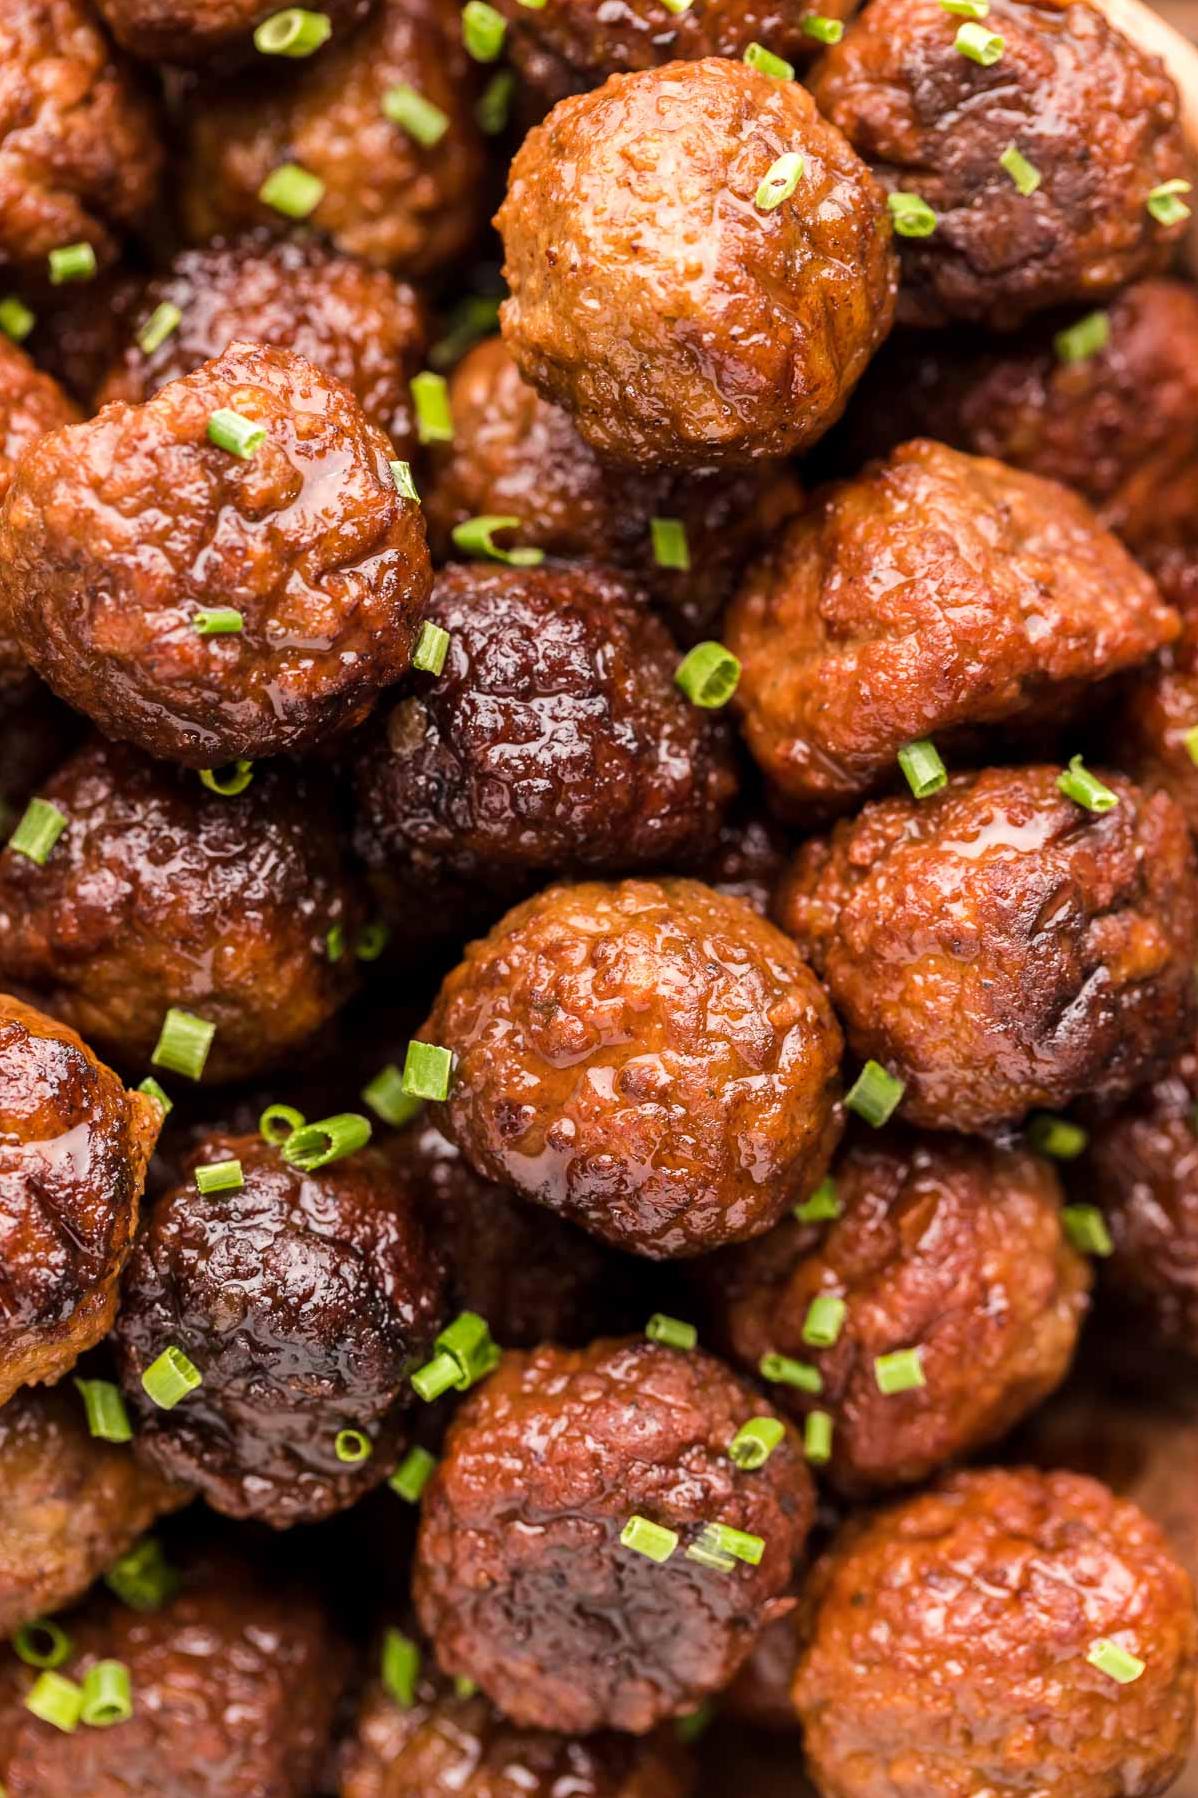  These meatballs are not only delicious, but a perfect way to impress your dinner guests.